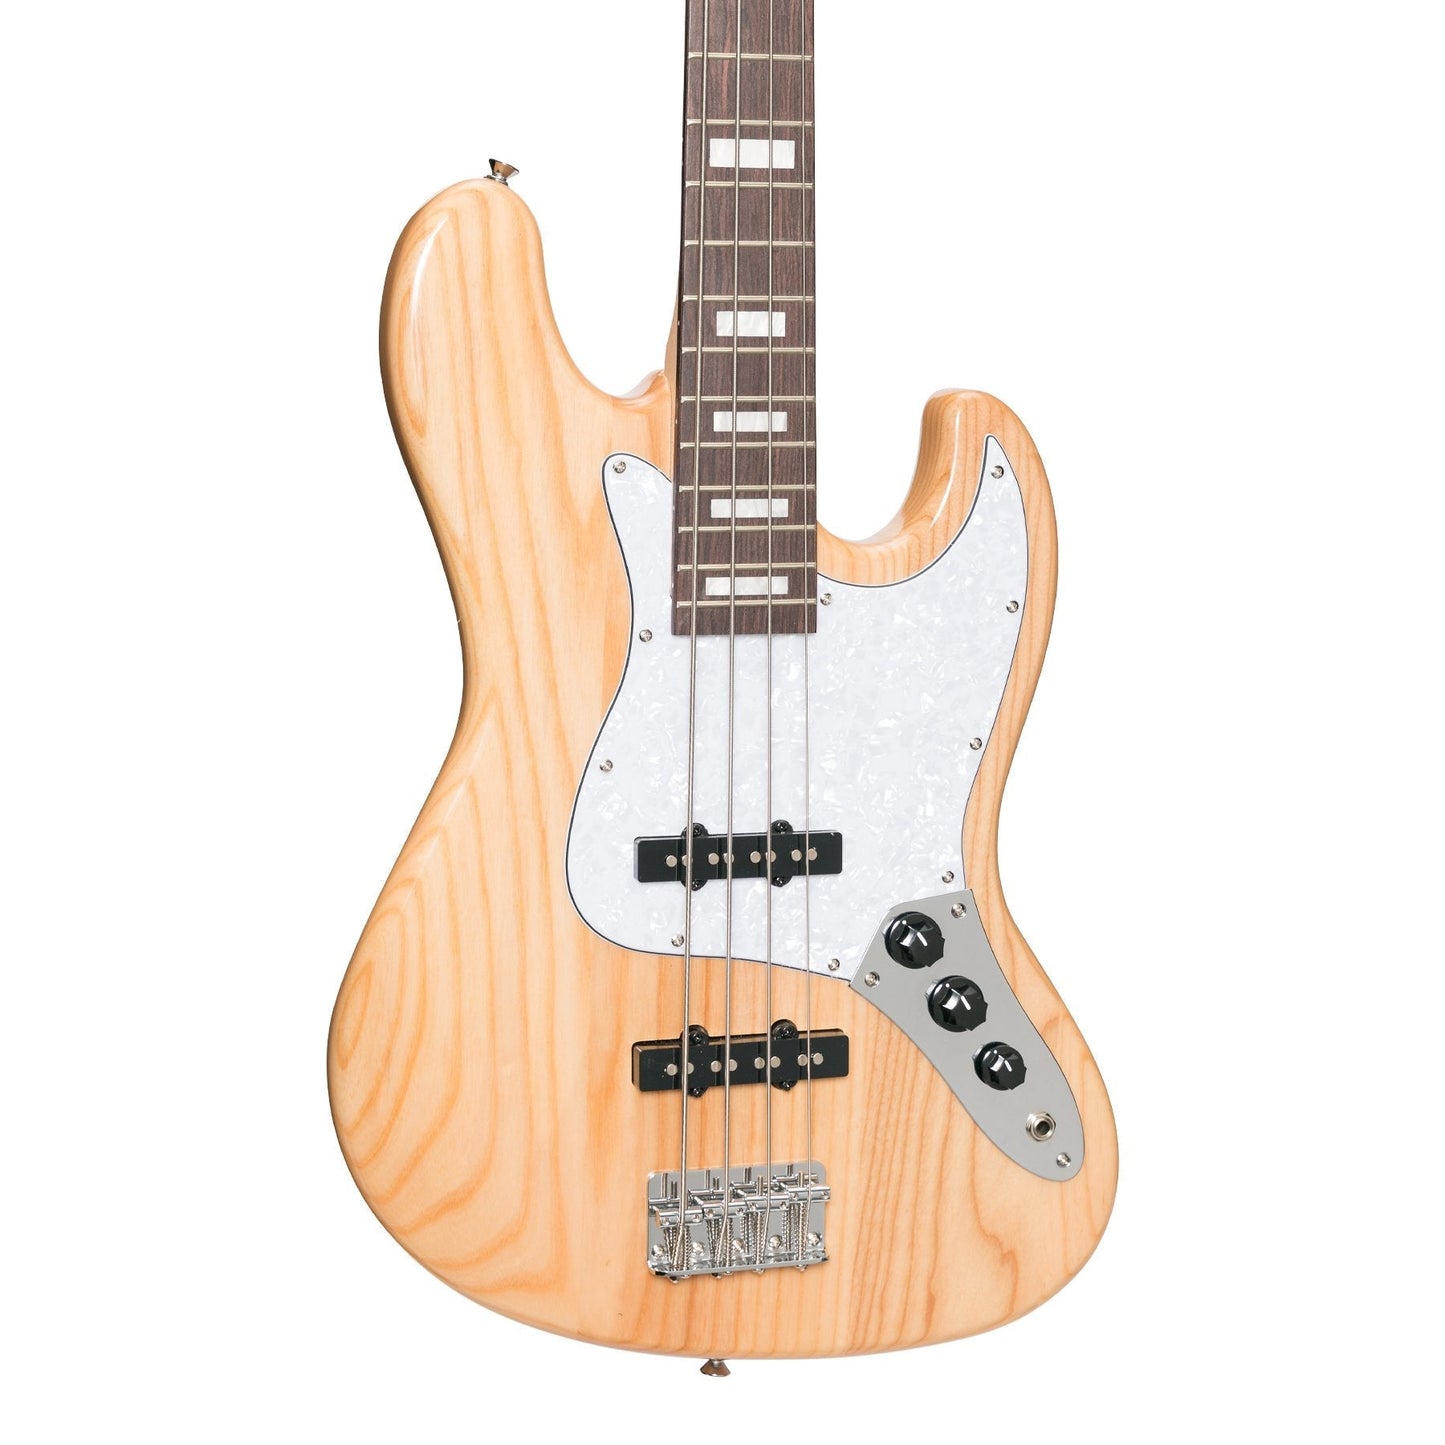 J&D Luthiers 4-String JB-Style Electric Bass Guitar (Natural Gloss)